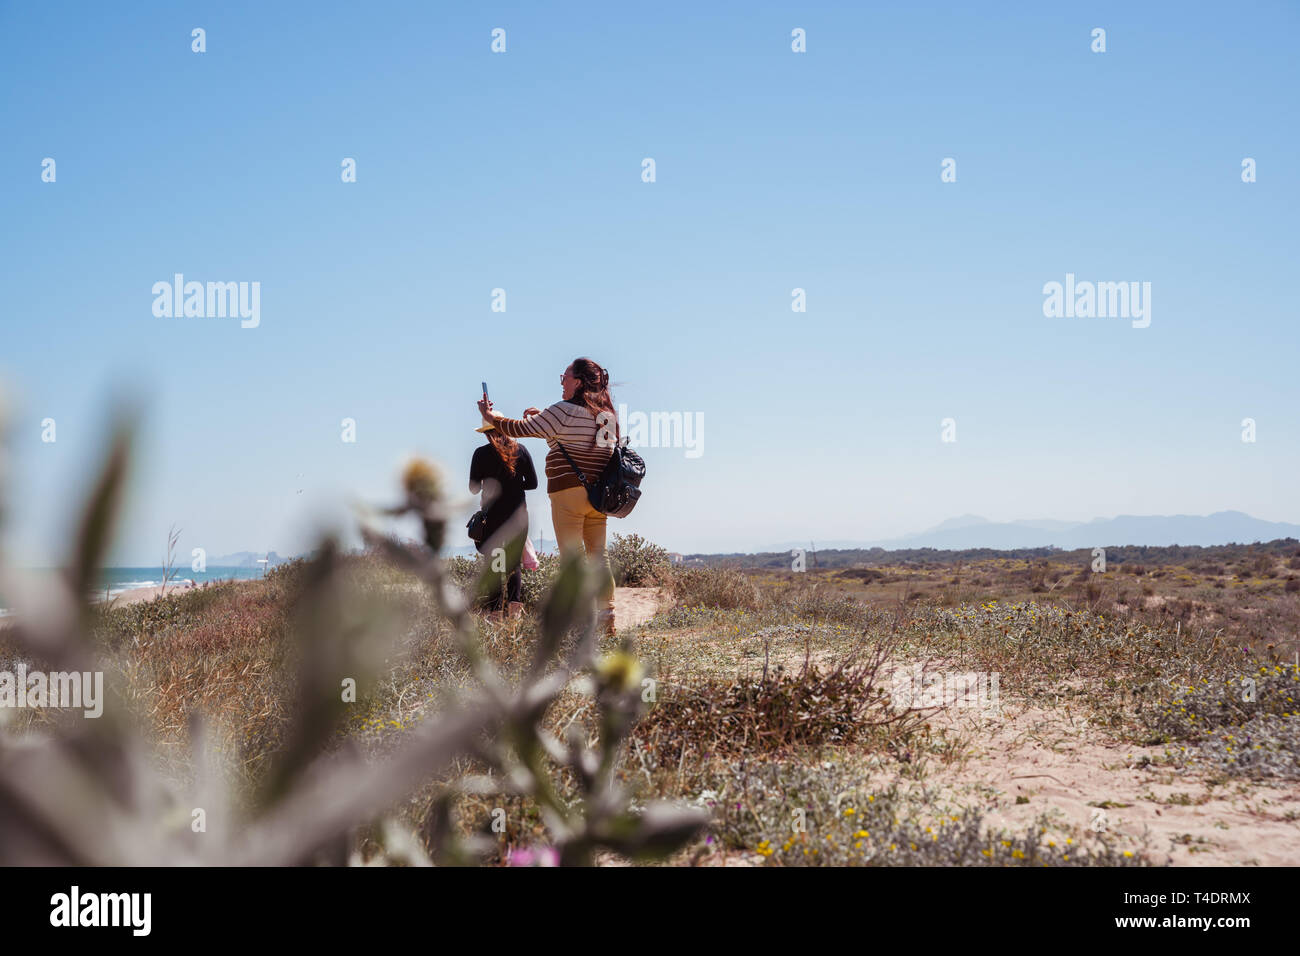 Valencia,Spain - April 13, 2019: Mid age woman taking selfie near the beach. Bushes and dry ground. Stock Photo